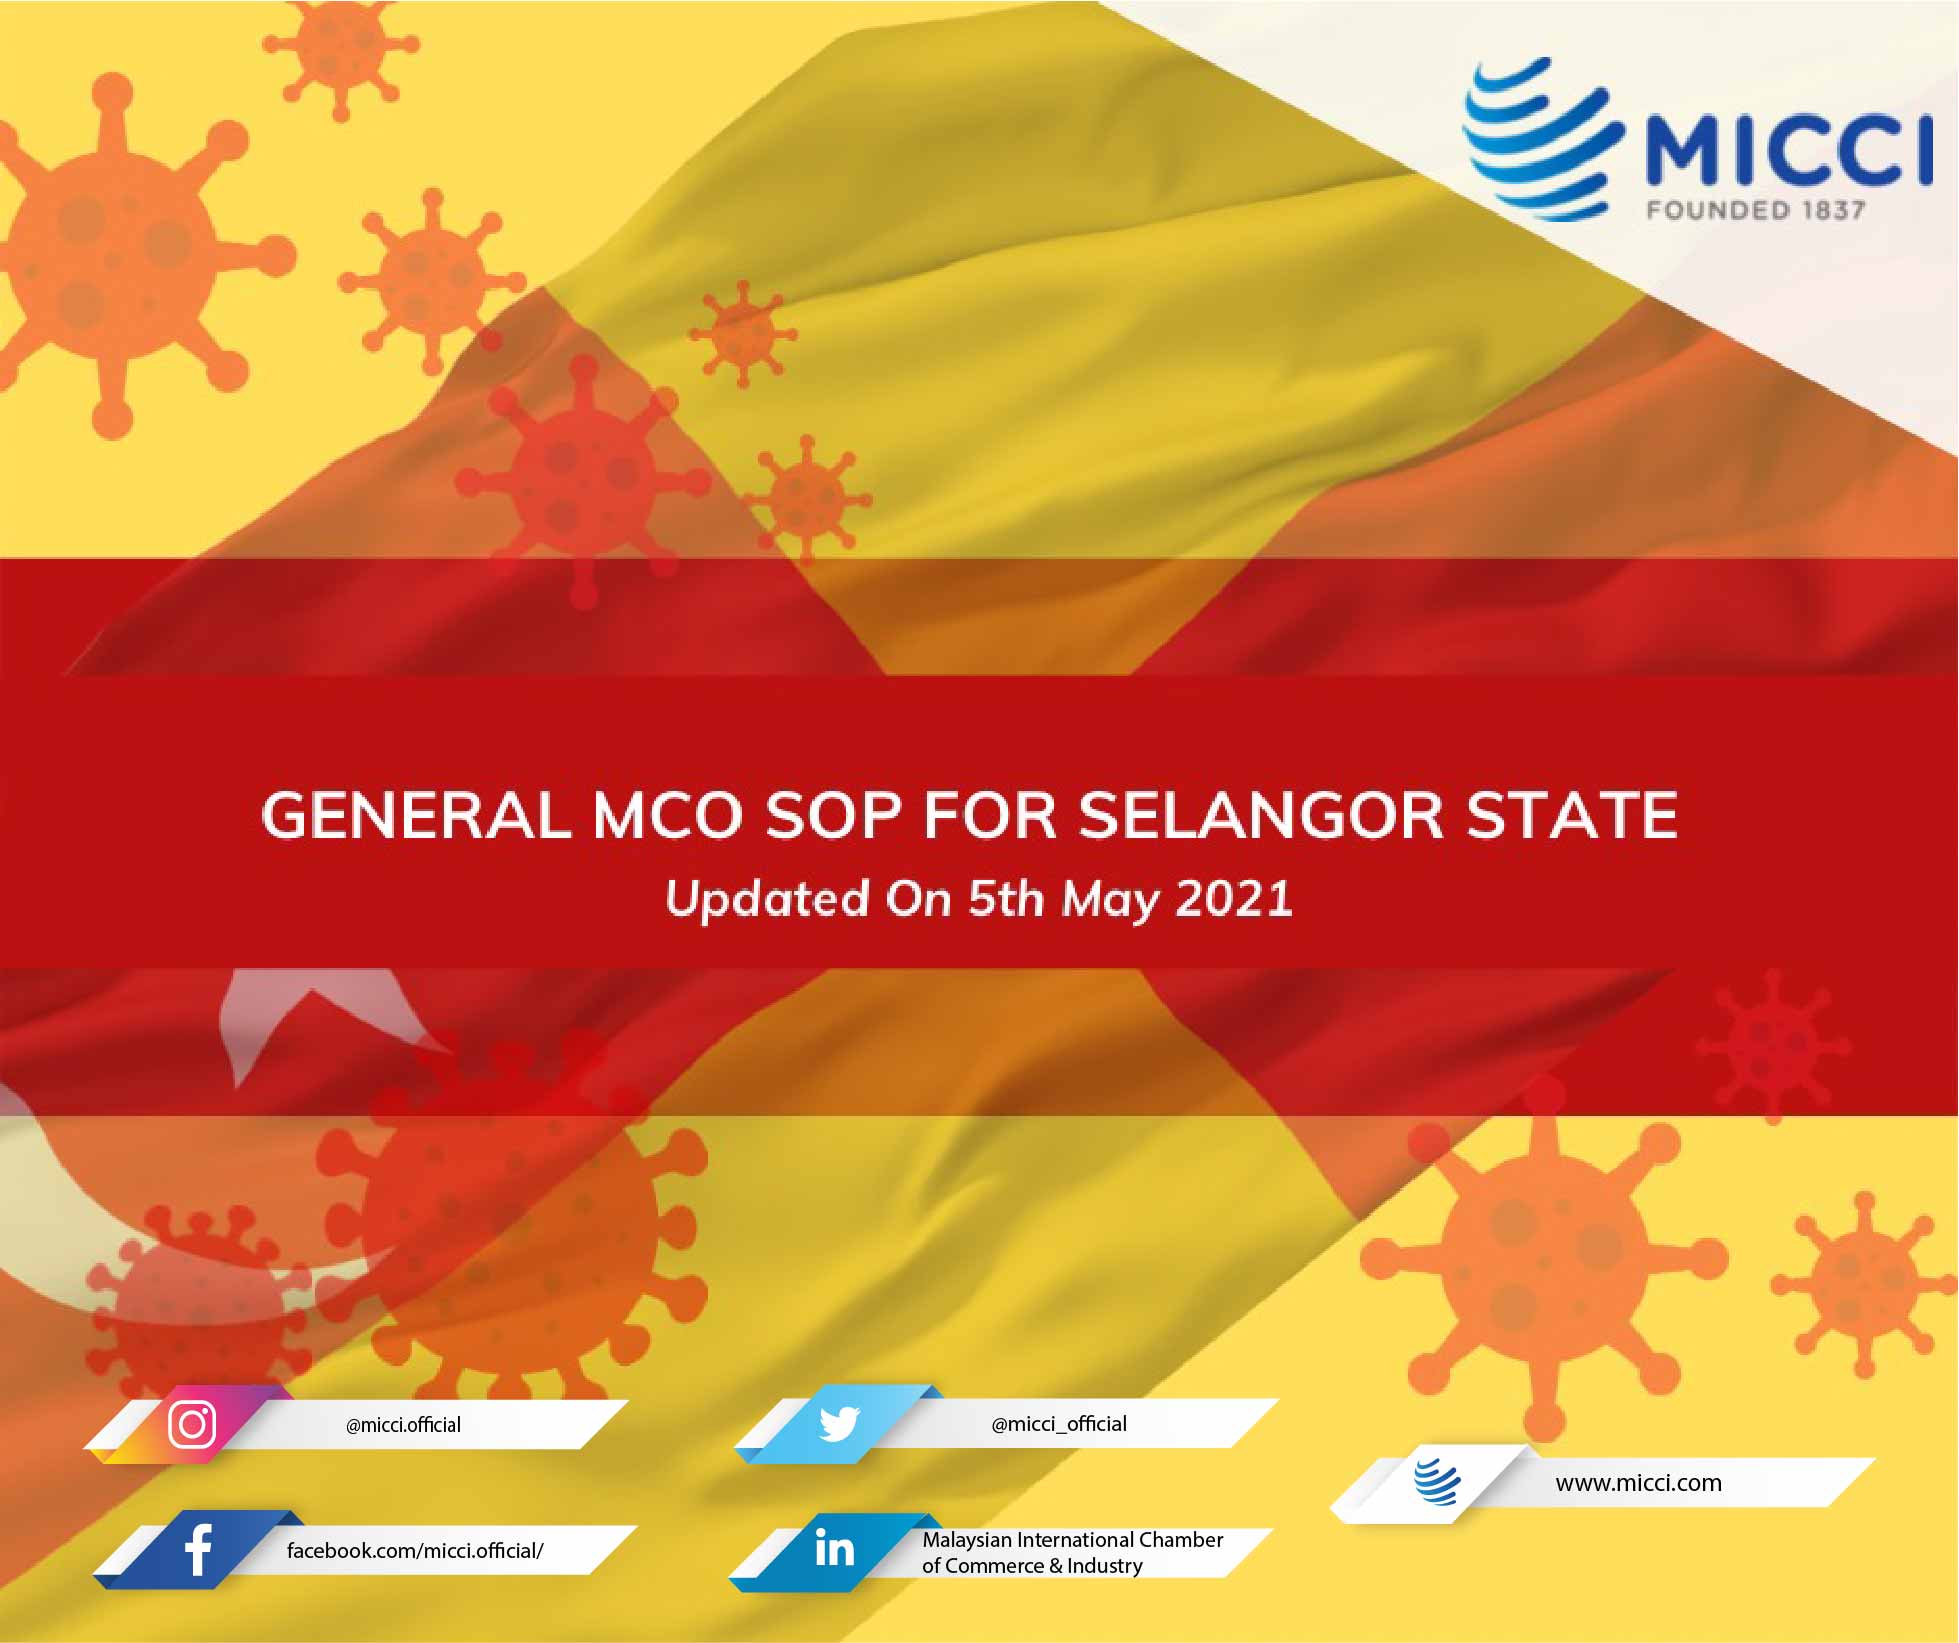 Latest sop for mco 3.0